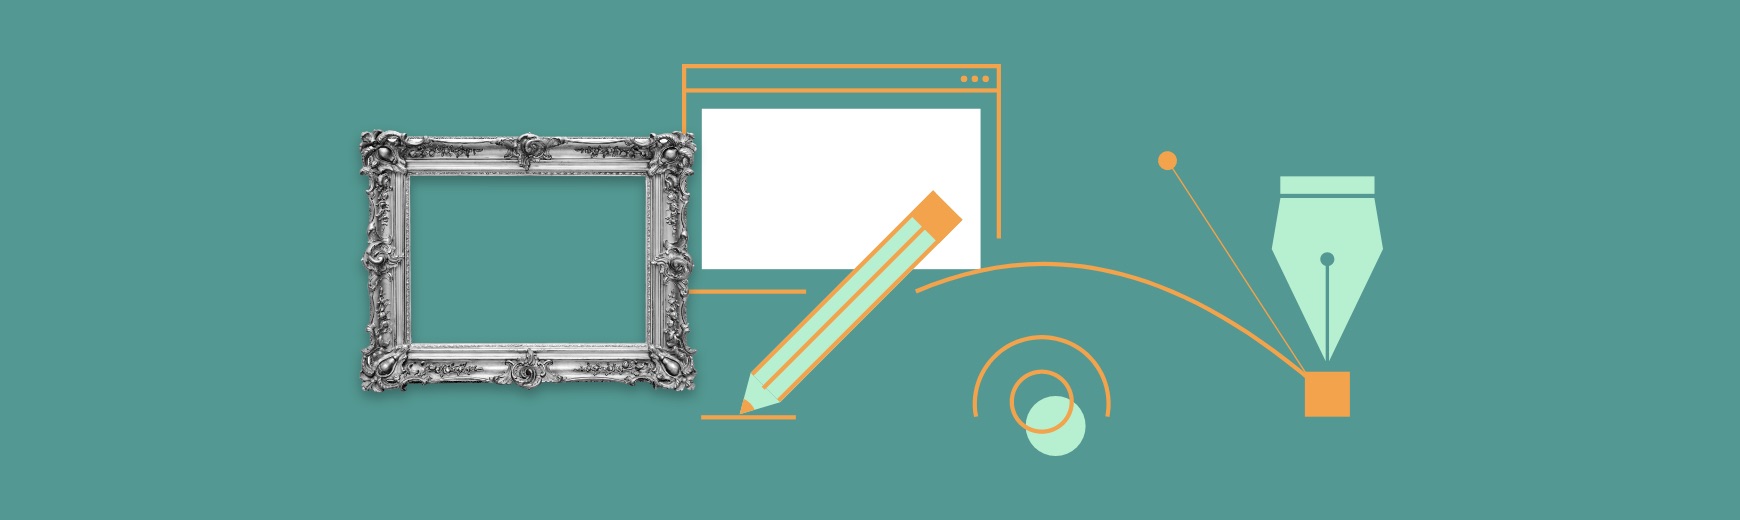 Illustration of pencil, pen, screen, and frame